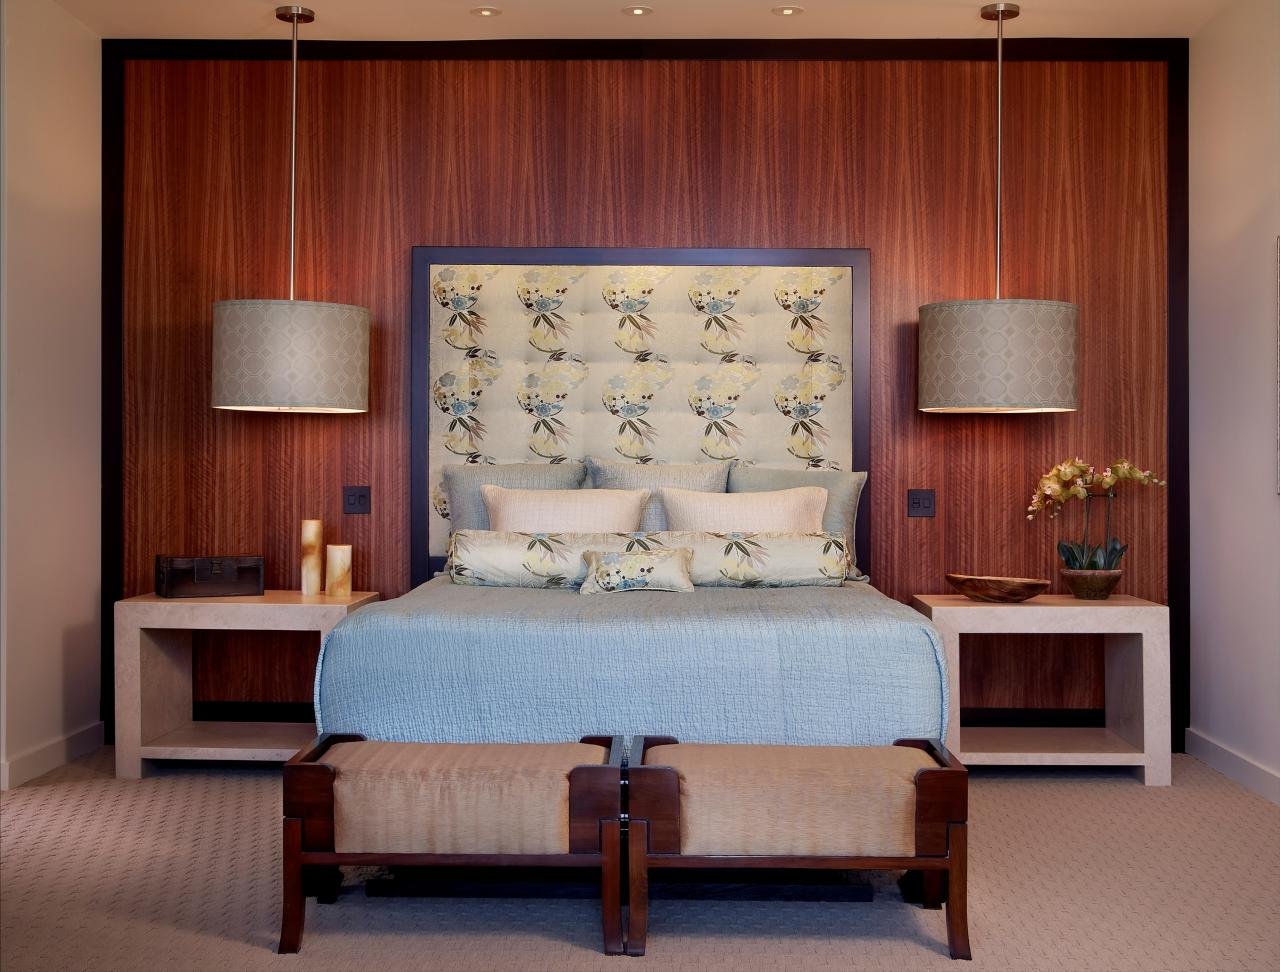 THE MASTER BEDROOM FEATURES A CUSTOM BED AND CONTINUES THE ASIAN MOTIF FOUND THROUGHOUT THE HOME.